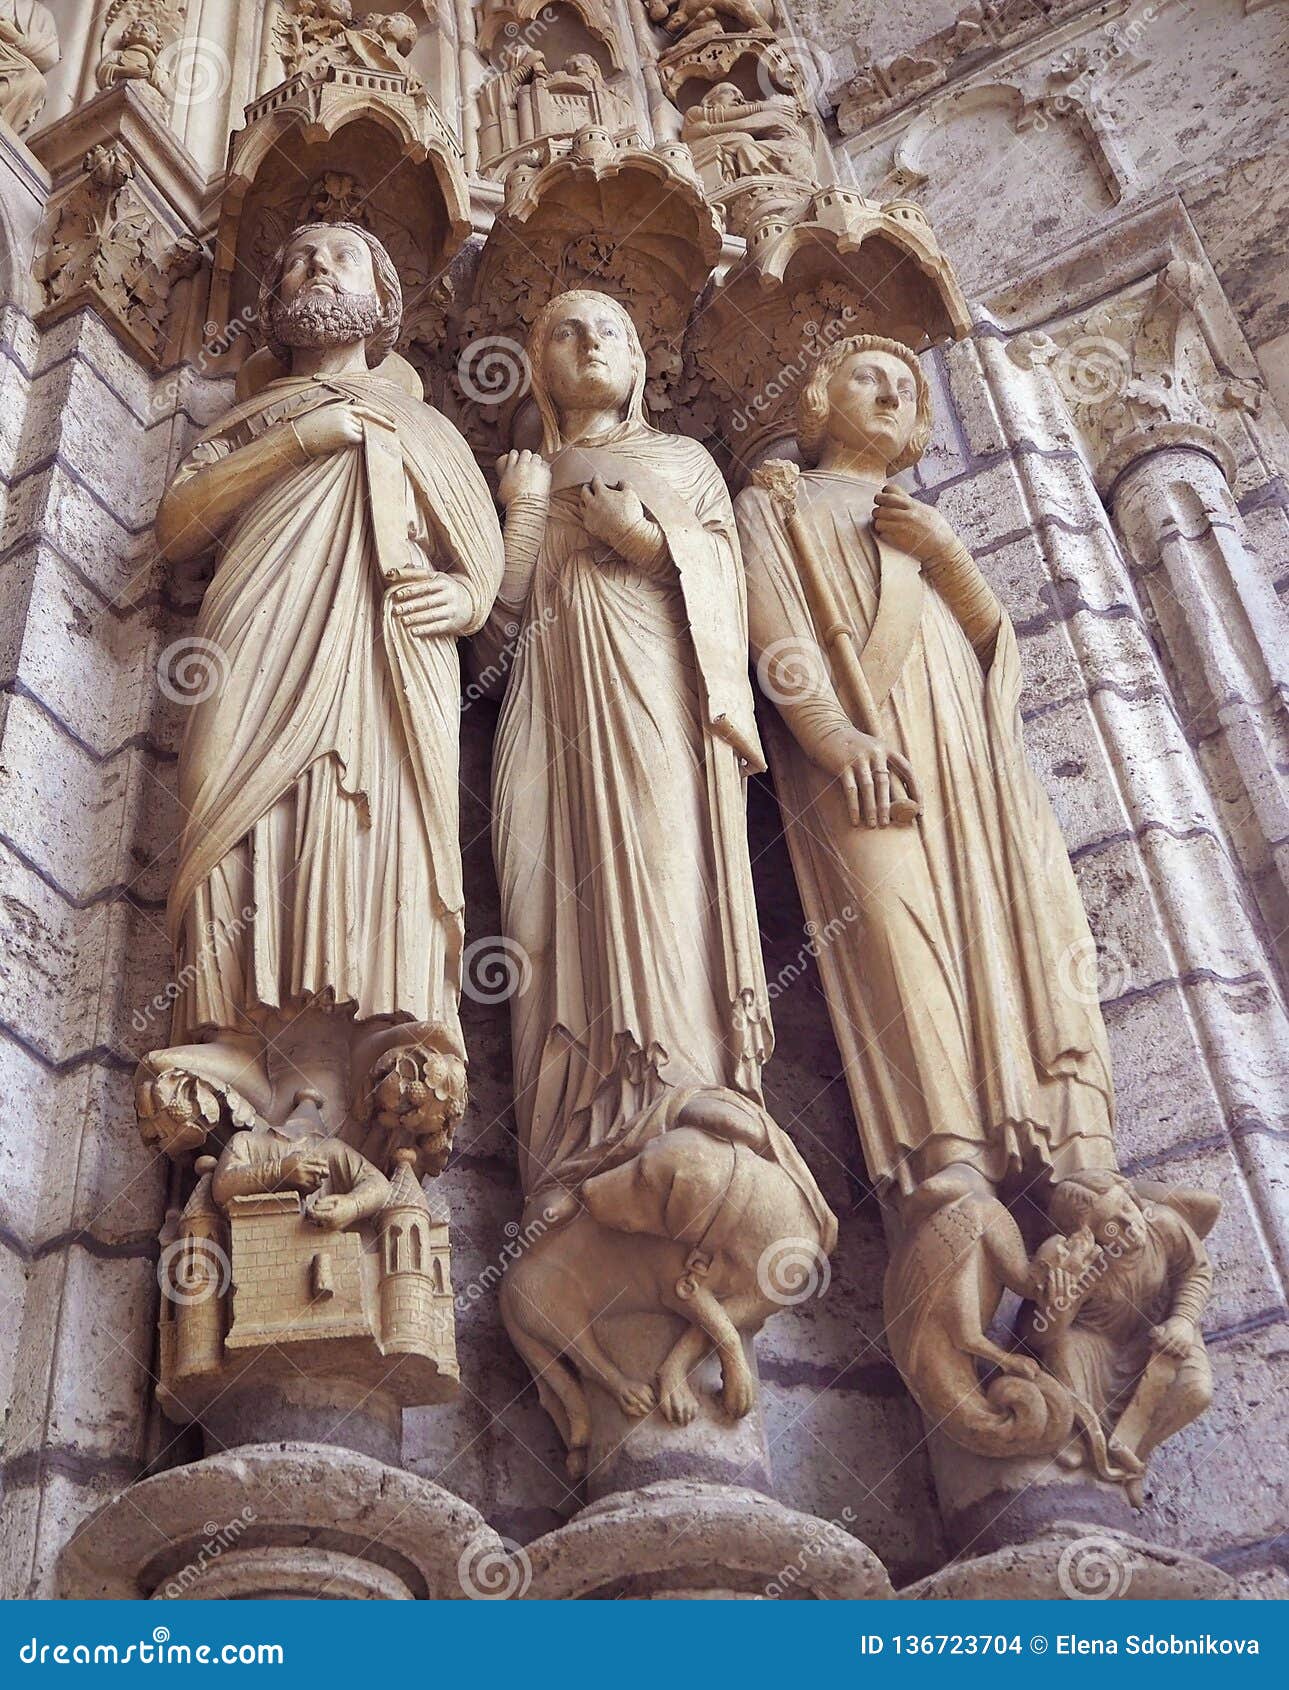 statues details at cathedrale notre dame de chartres, a medieval old catholic cathedral in chartres, france